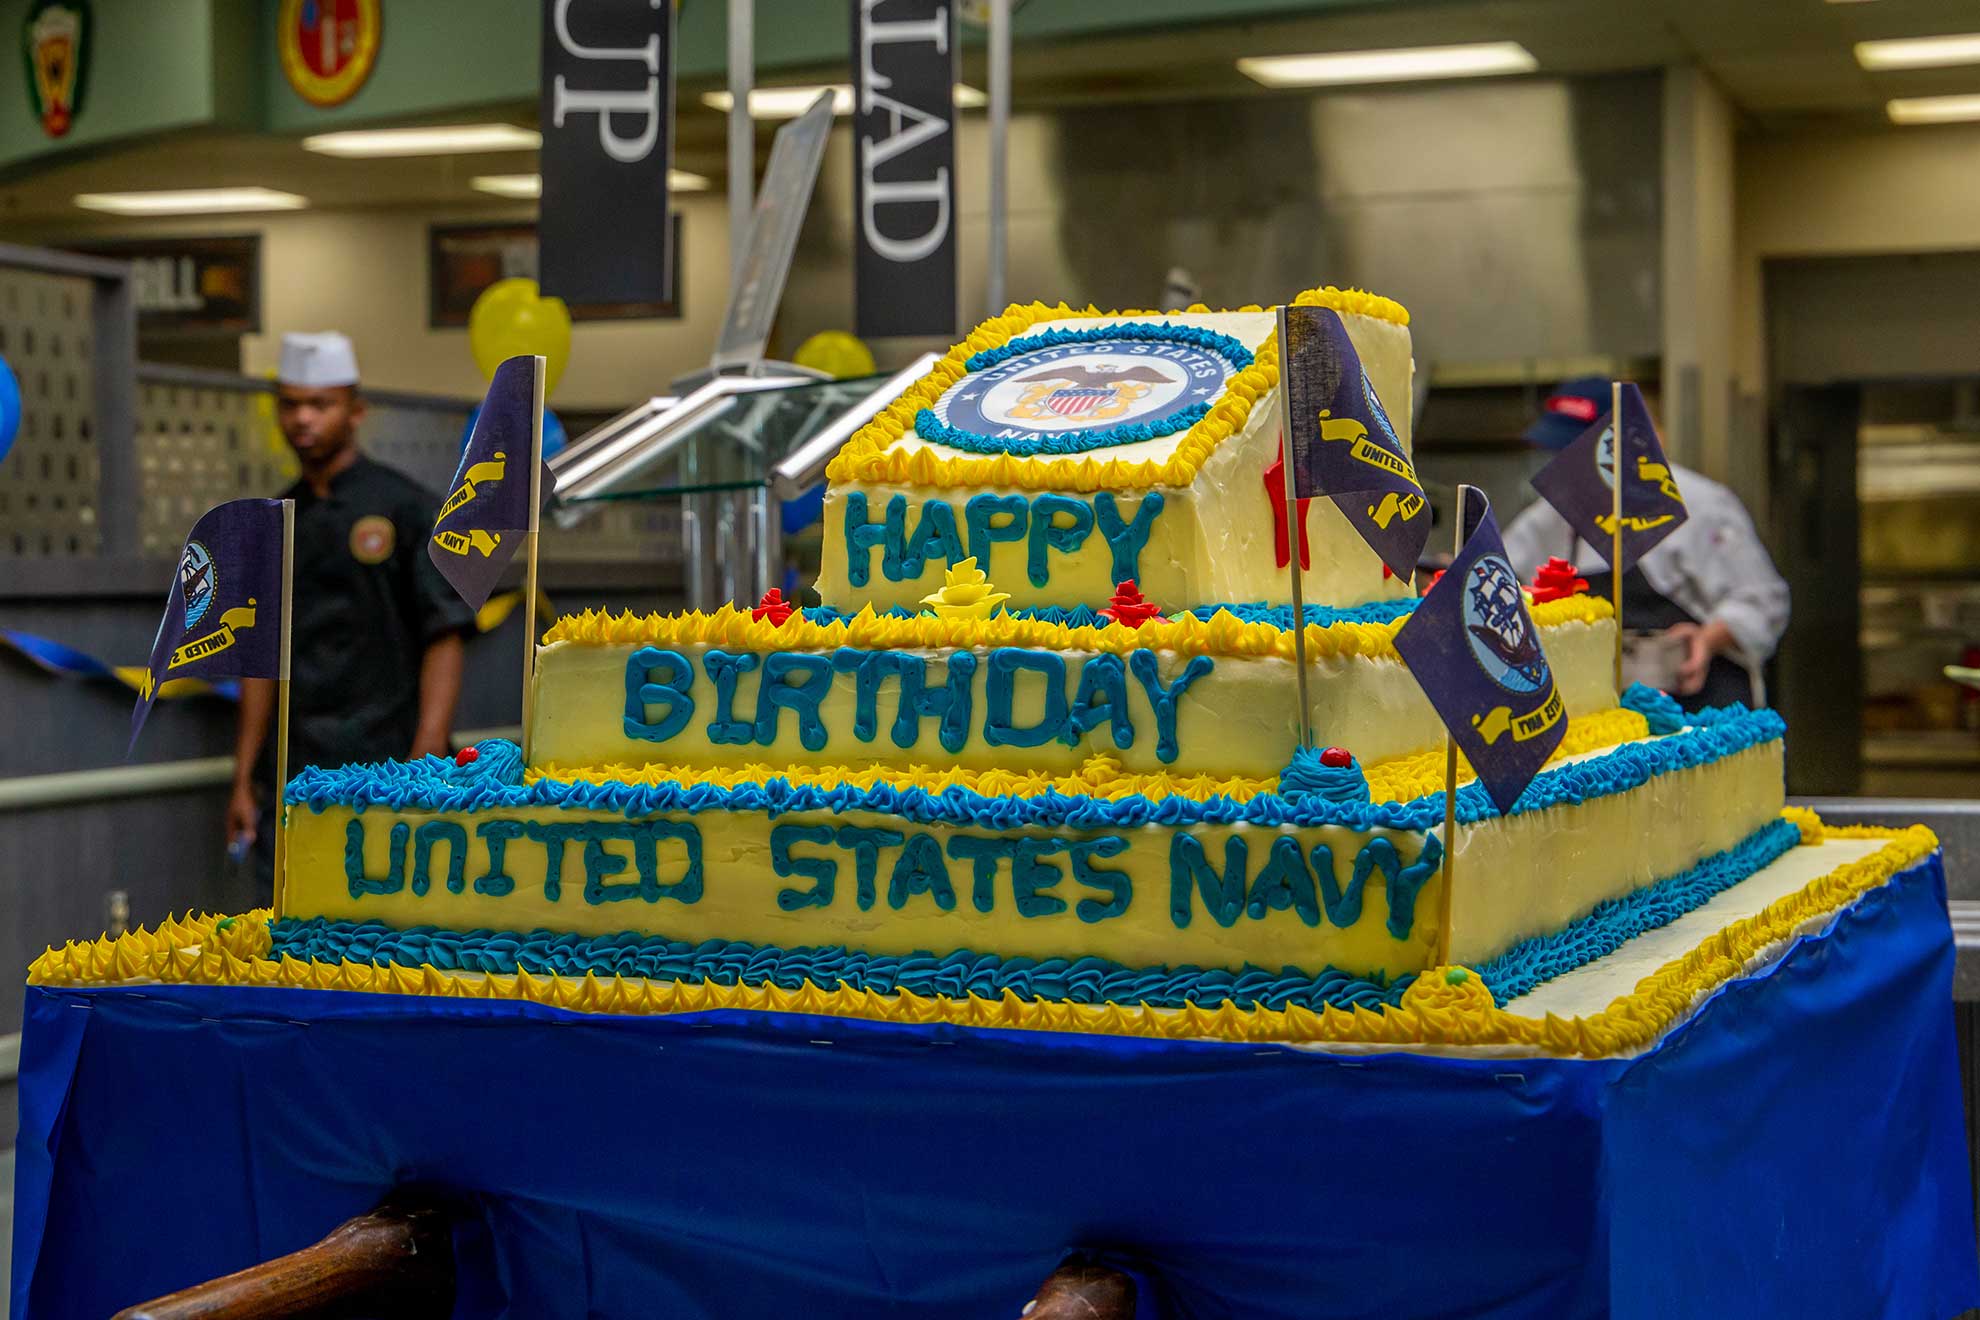 Washington D.C. (Oct. 12, 2018) Chief of Naval Operations Adm. John Richardson, right, is joined by the most junior and senior Sailors attending for a cake cutting during the 243rd Navy birthday celebration at the Pentagon -- U.S. Navy photo by MCS1 Raymond D. Diaz III. -